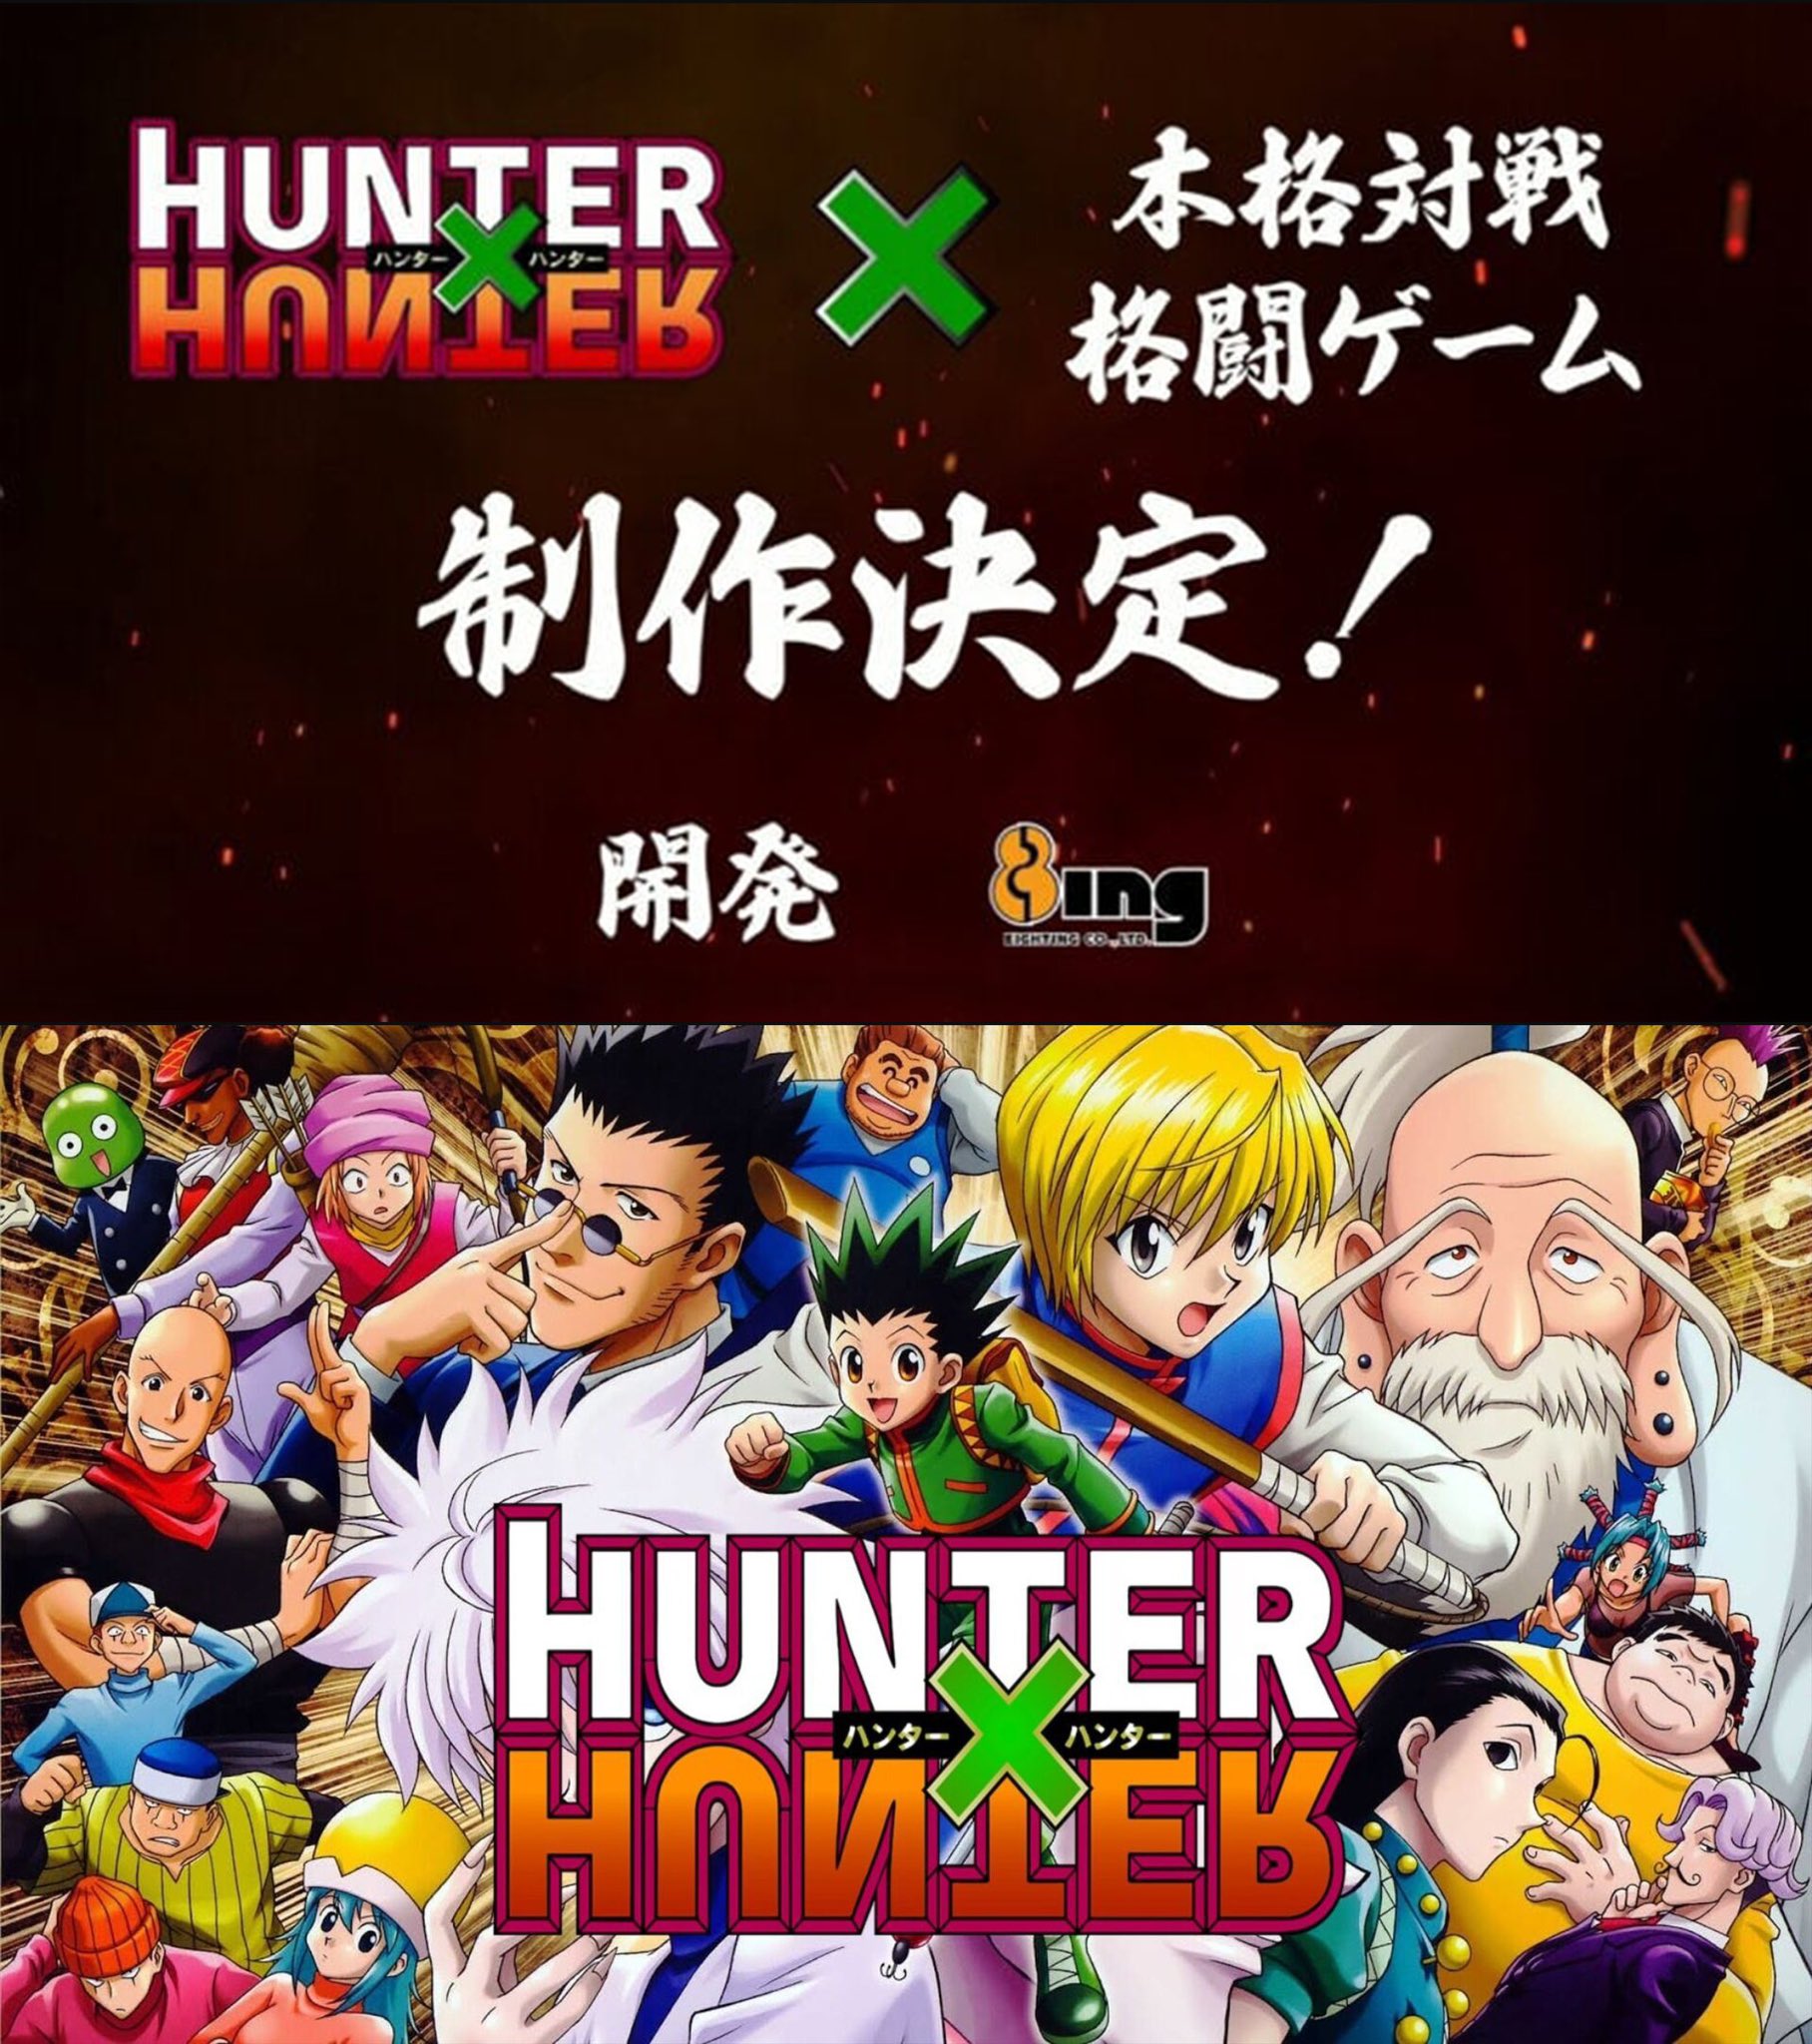 Hunter X Hunter Fighting Game Announced By Bushiroad Games